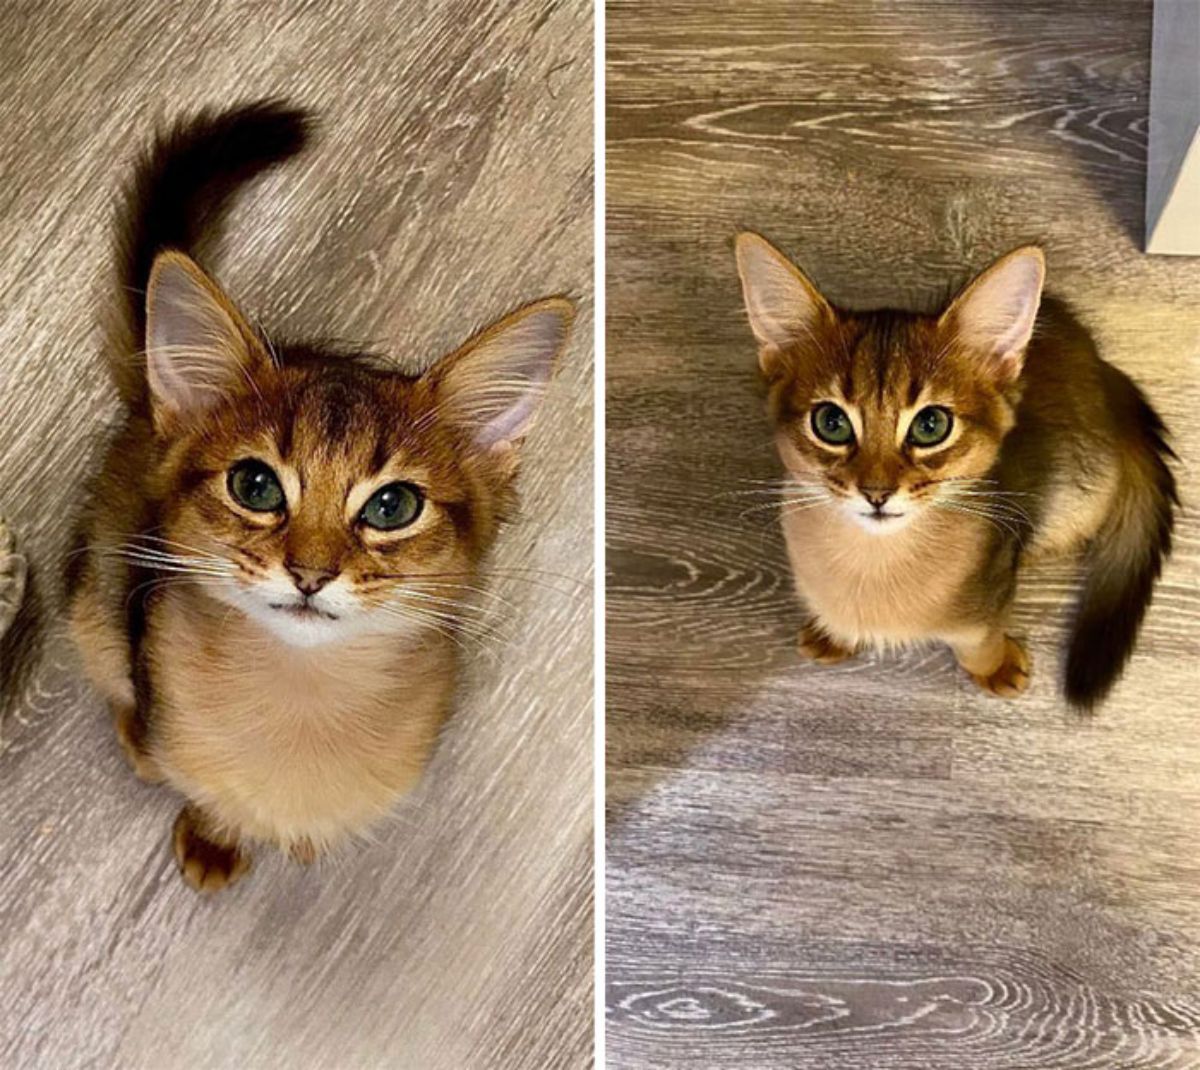 2 photos of a brown and black fluffy kitten sitting on the wooden floor